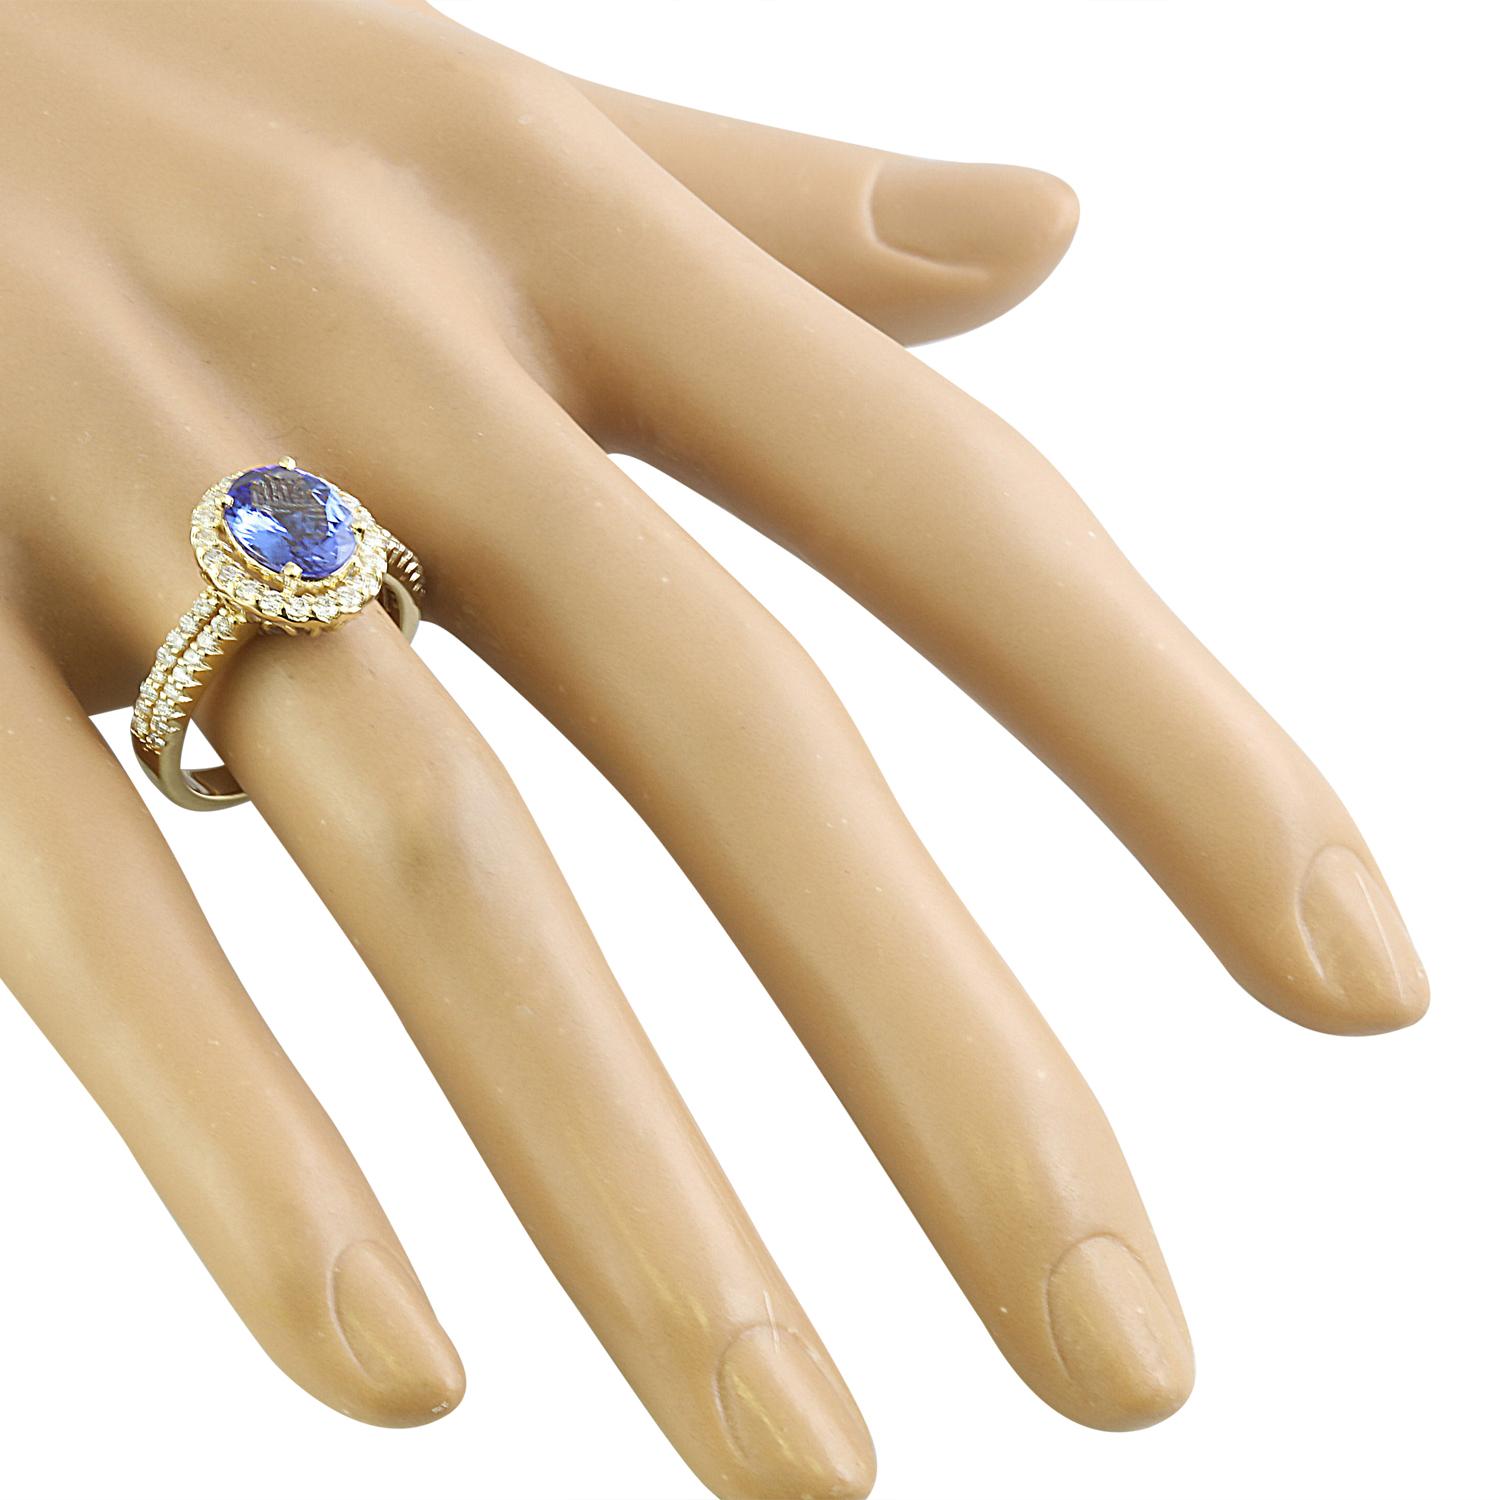 Exquisite Natural Tanzanite Diamond Ring in 14K Yellow Gold In New Condition For Sale In Los Angeles, CA